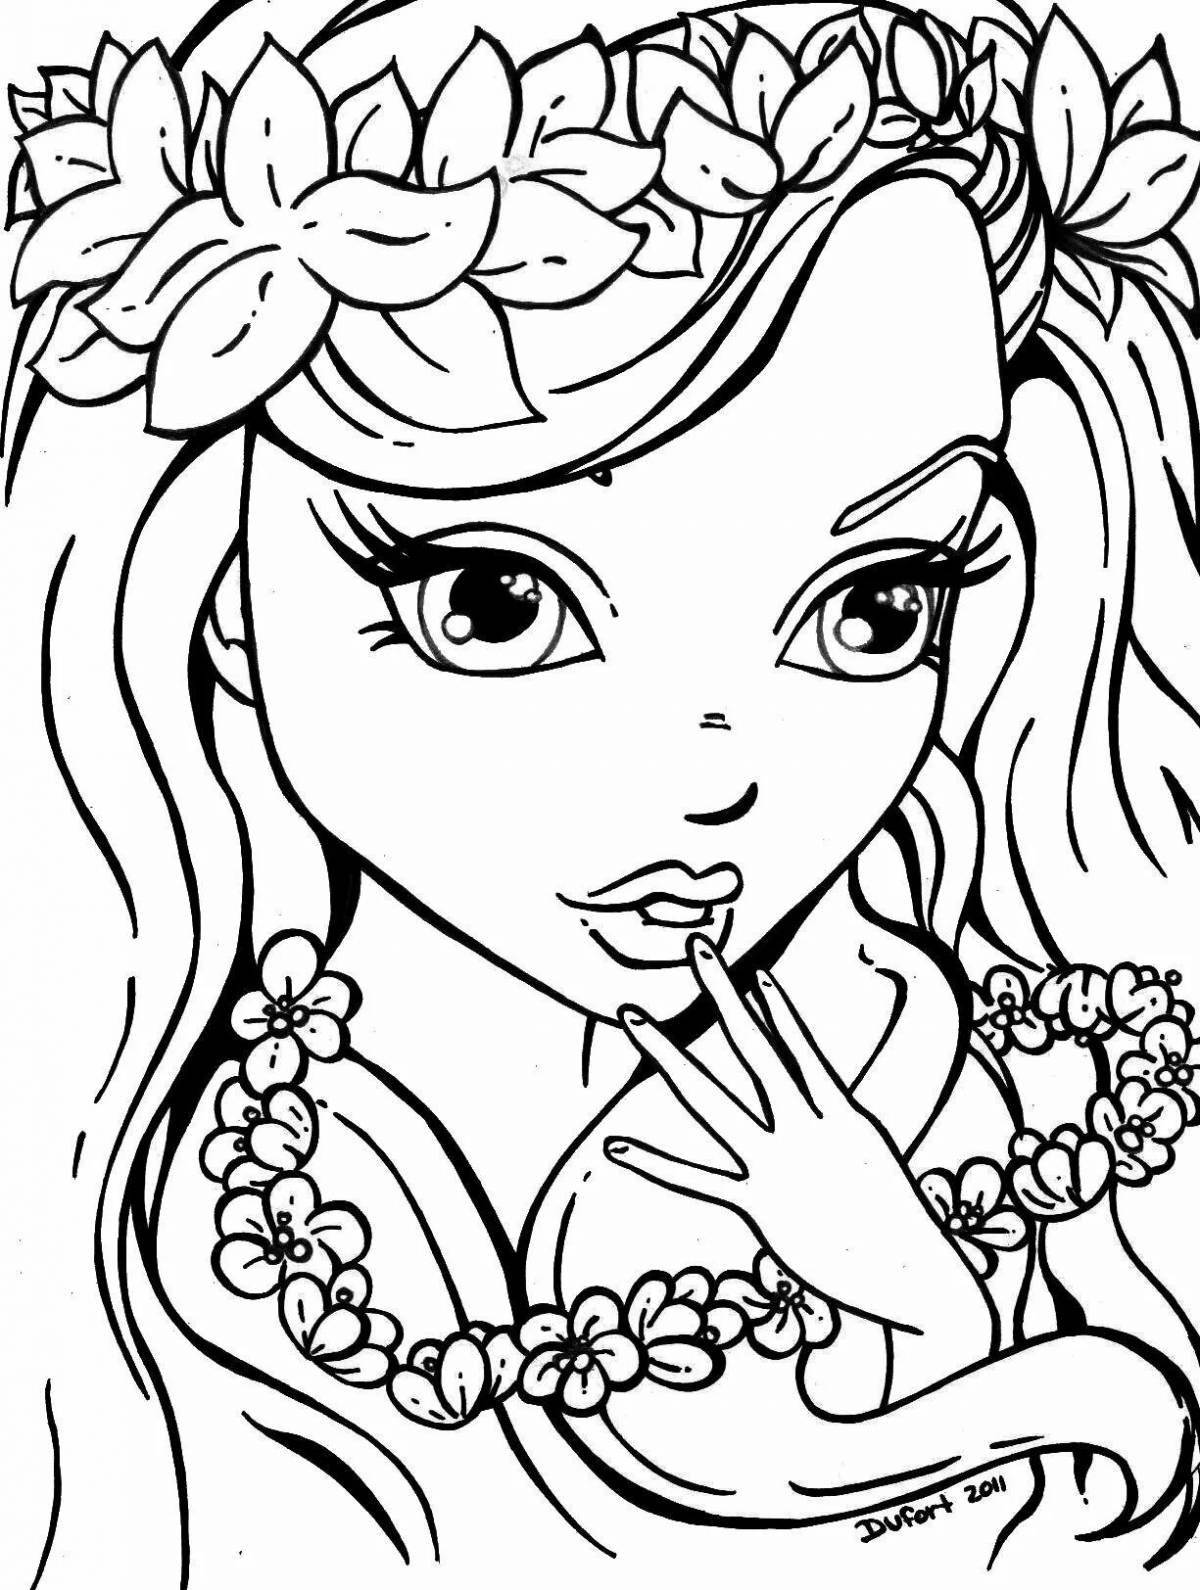 Fun coloring book popular for 12 year old girls